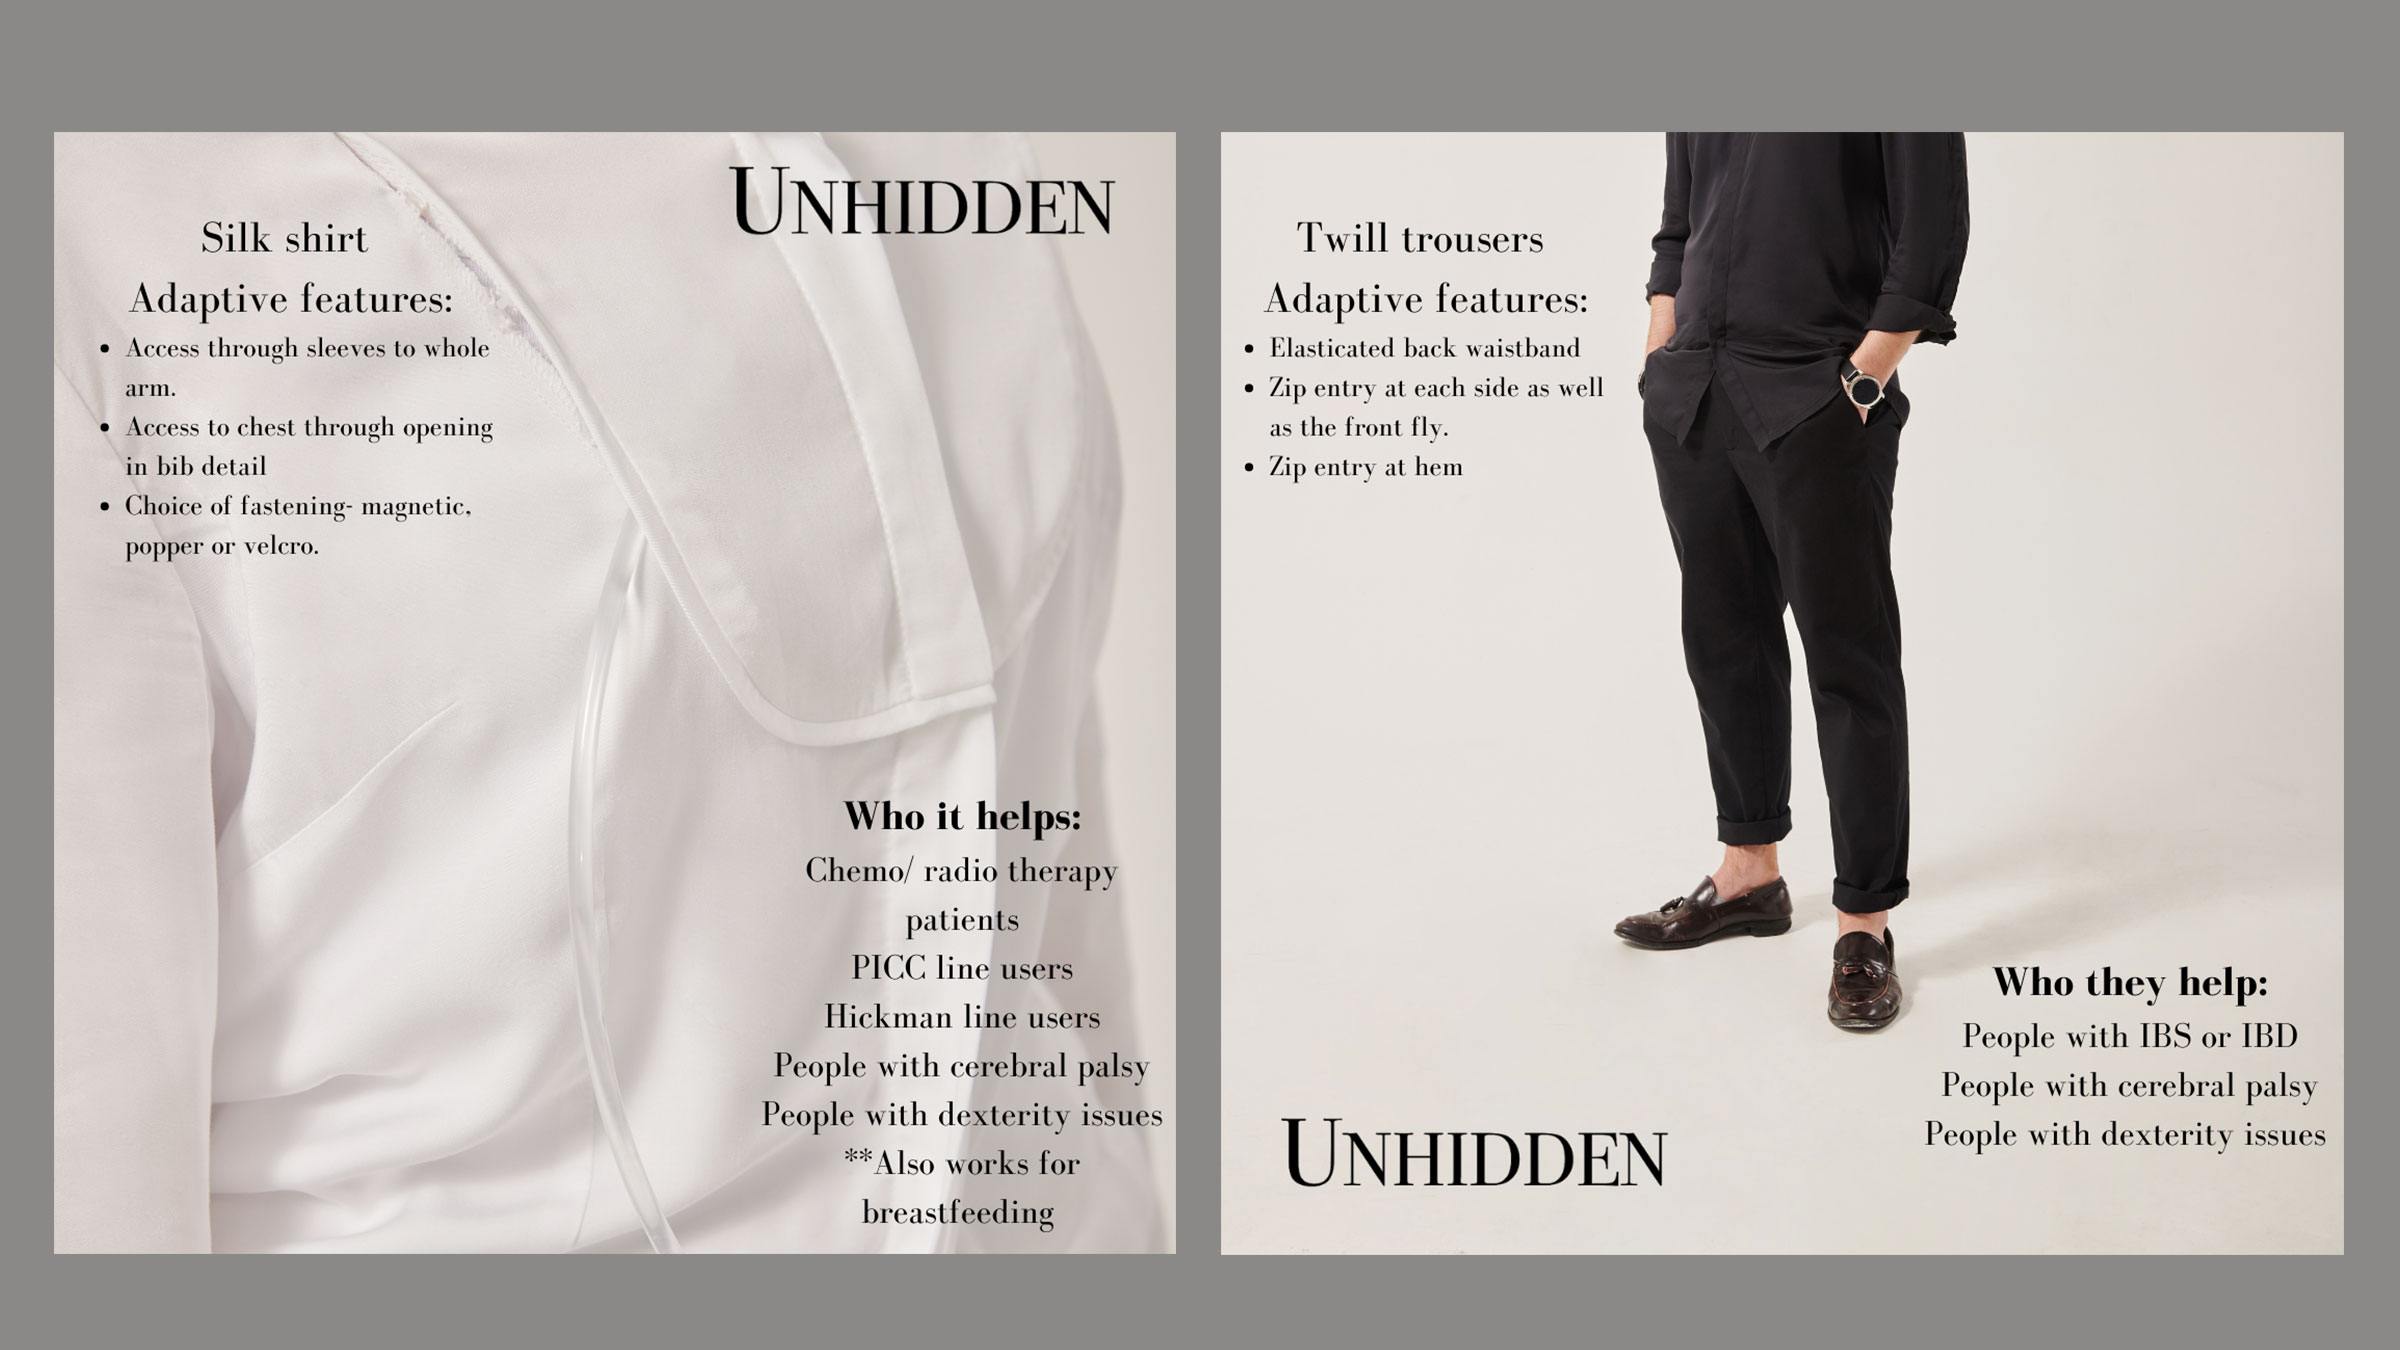 Two images of adaptive clothing from the brand Unhidden. The left shows a white shirt with adaptive features and the right shows a pair of black trousers with adaptive features.